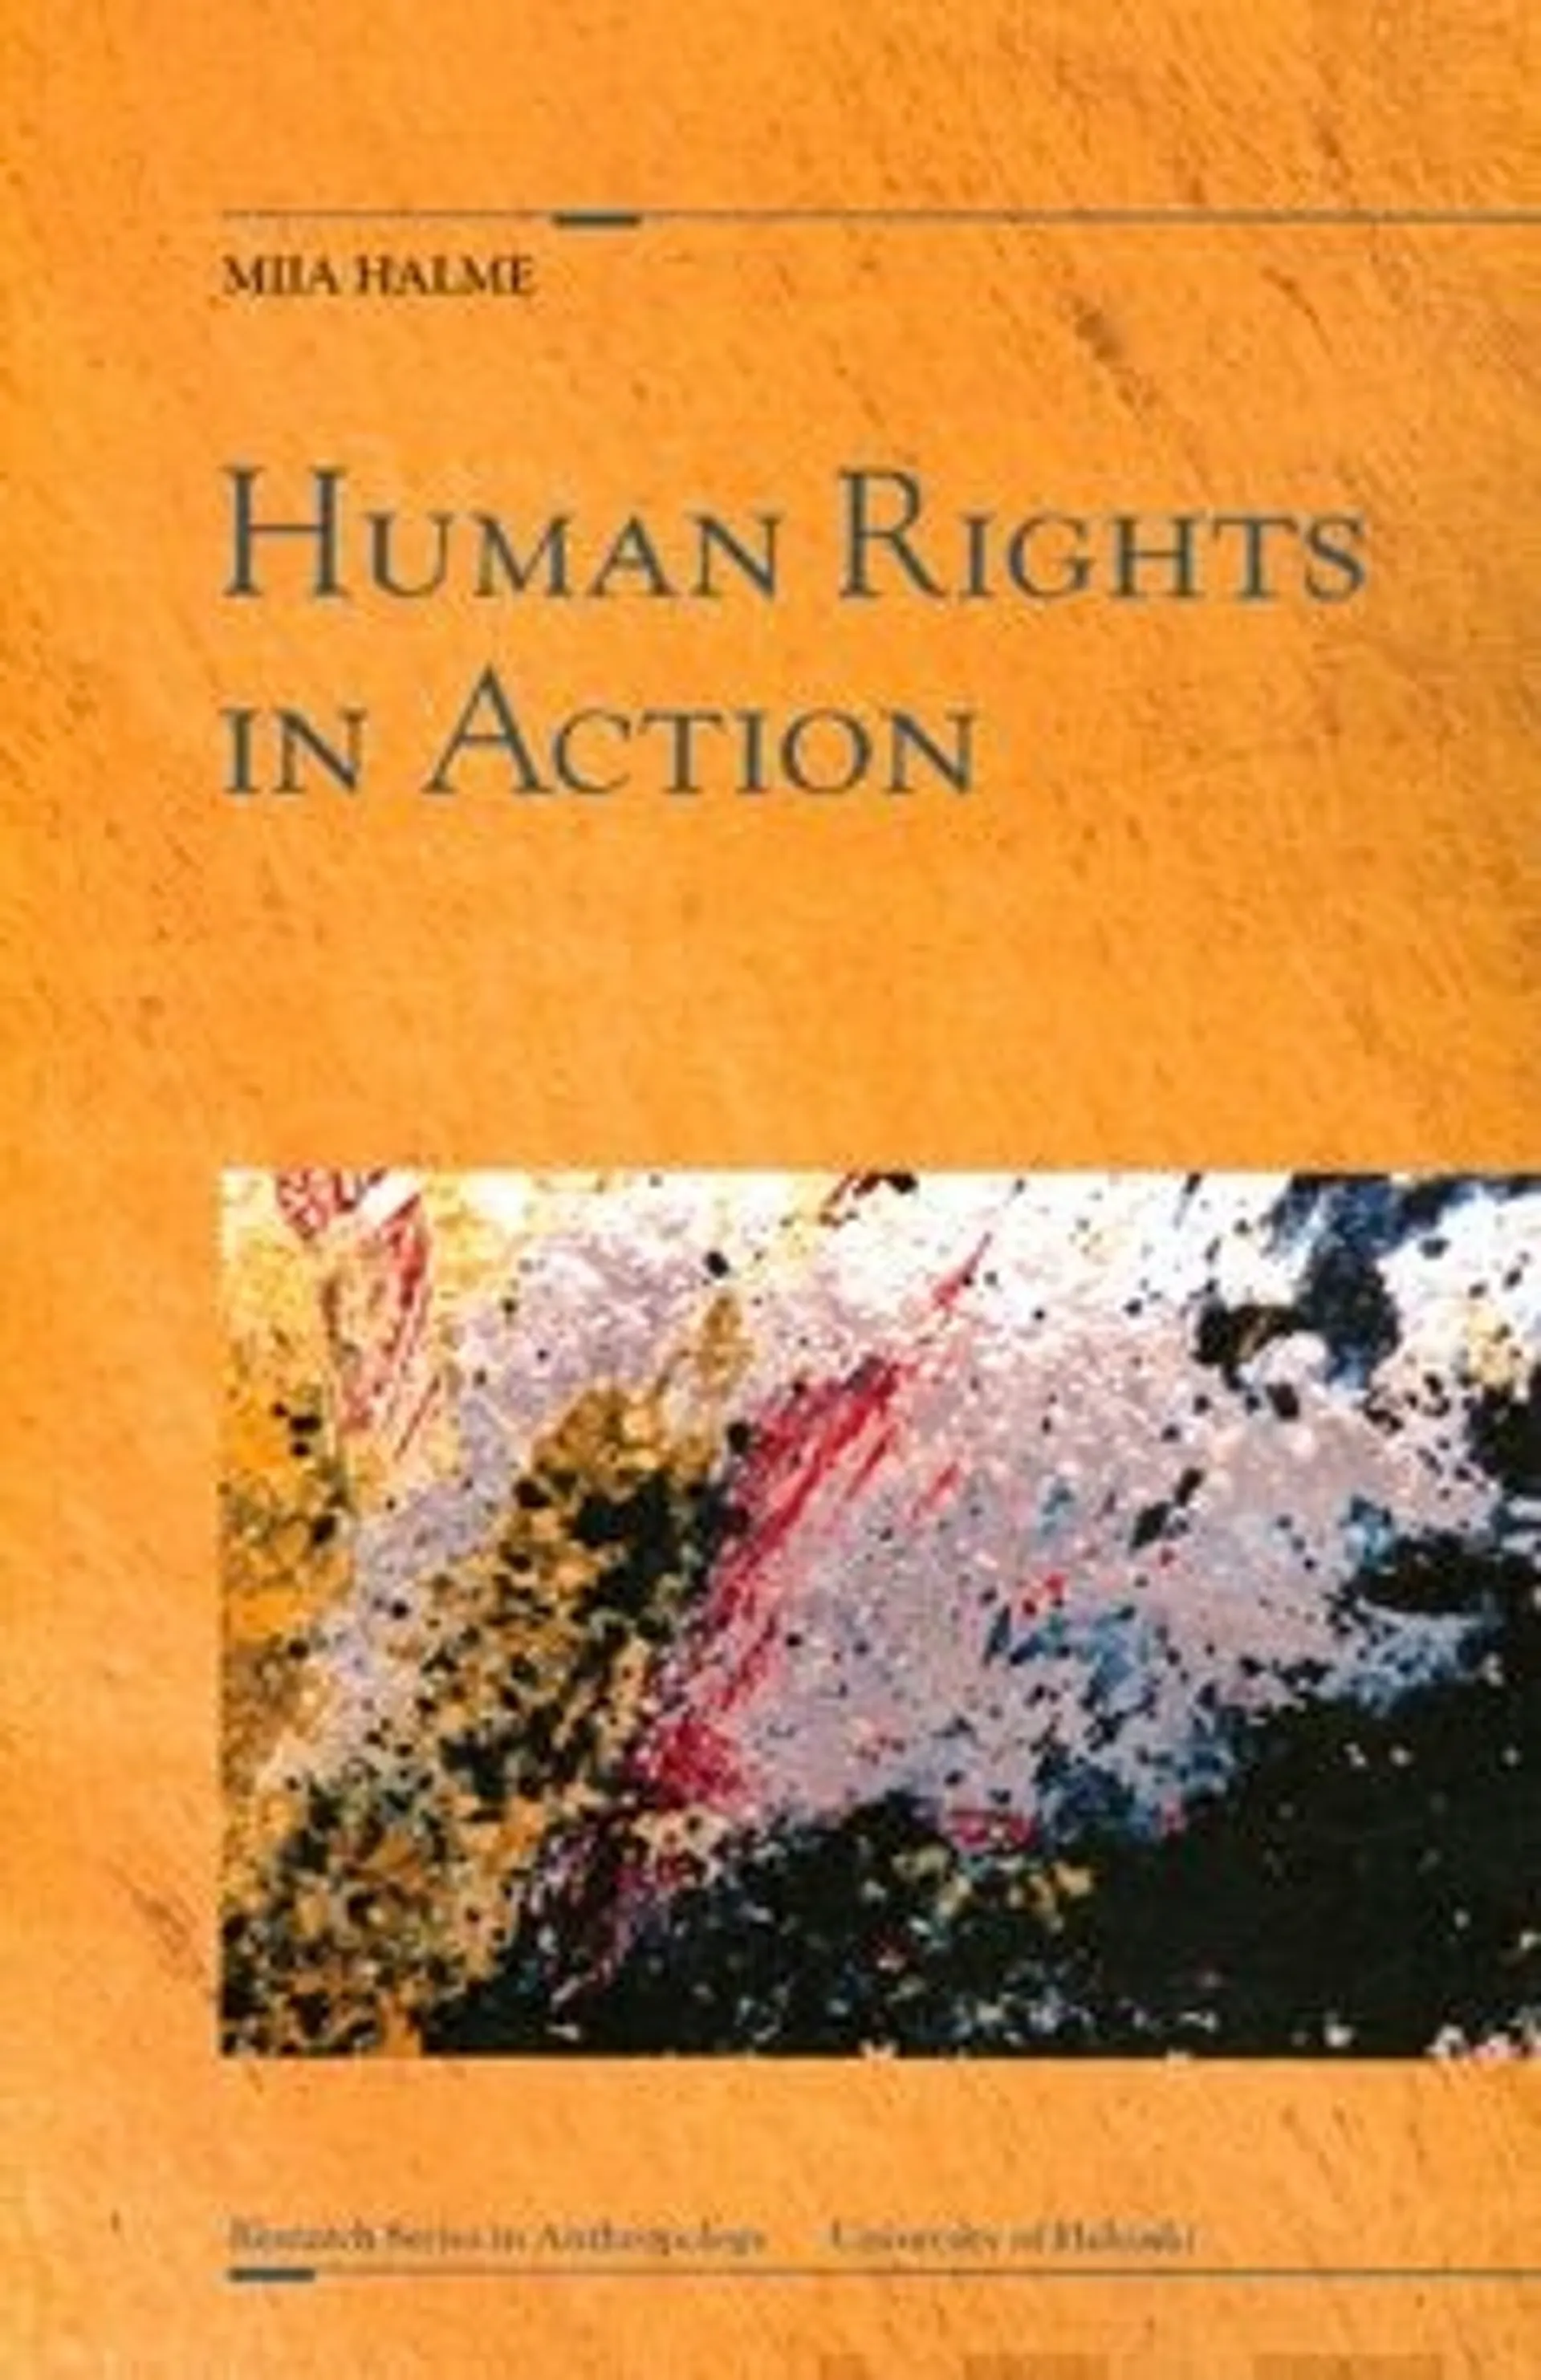 Halme, Human rights in action